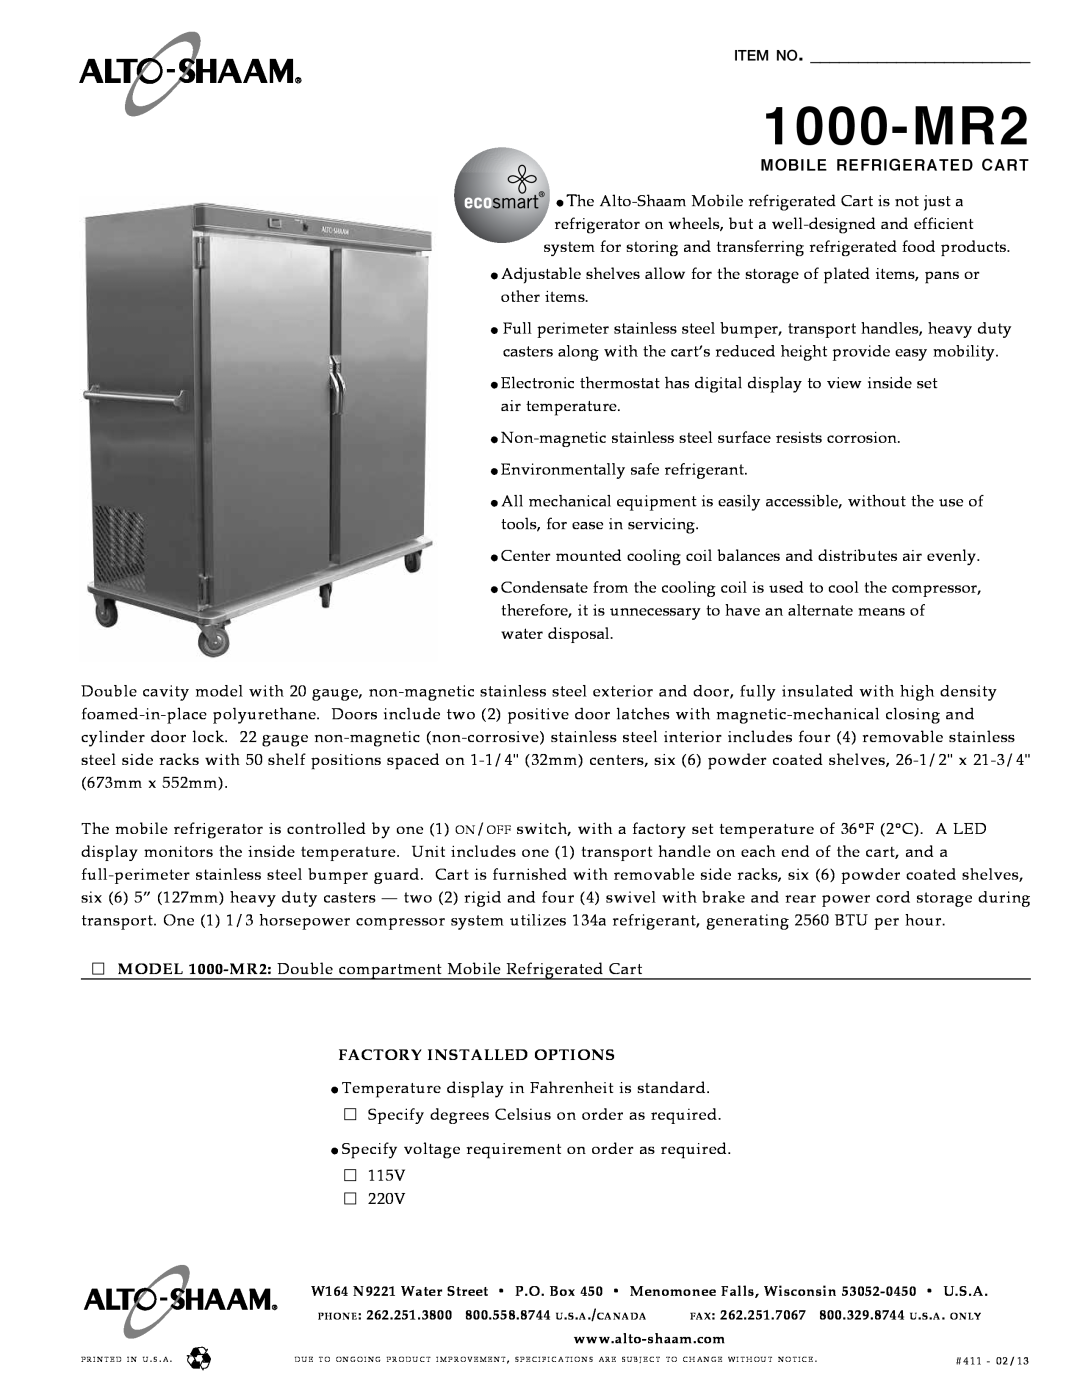 Alto-Shaam Mobile Refrigerated Cart manual 1000-MR2, Item No, mobile refrigerated cart, Factory installed Options 